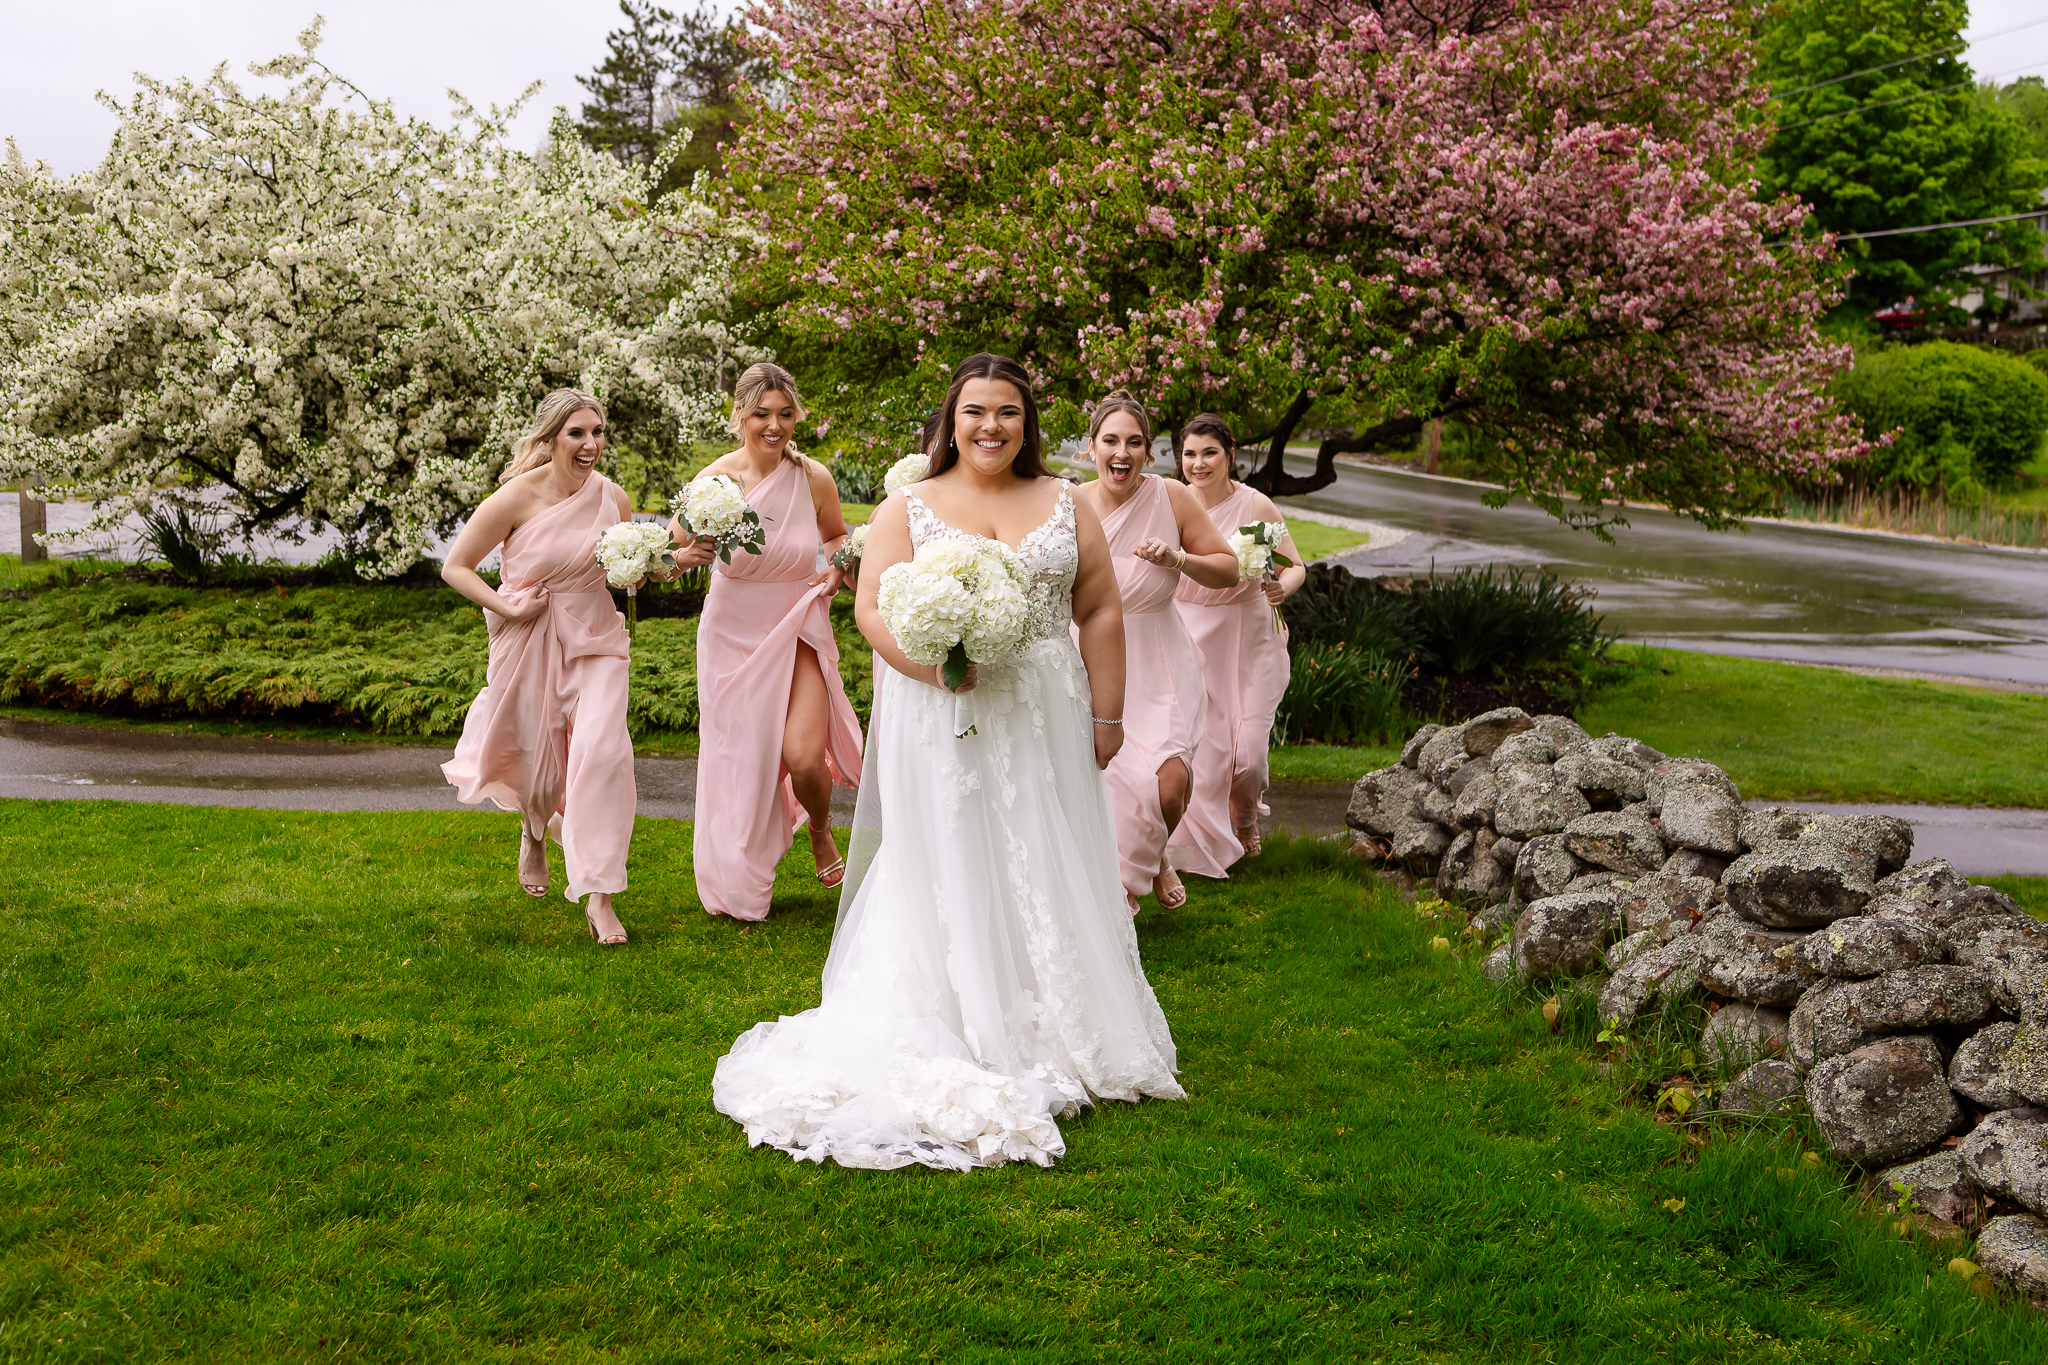 Bridesmaids in blush pink dresses walking behind bride as they sneak up and surprise her.